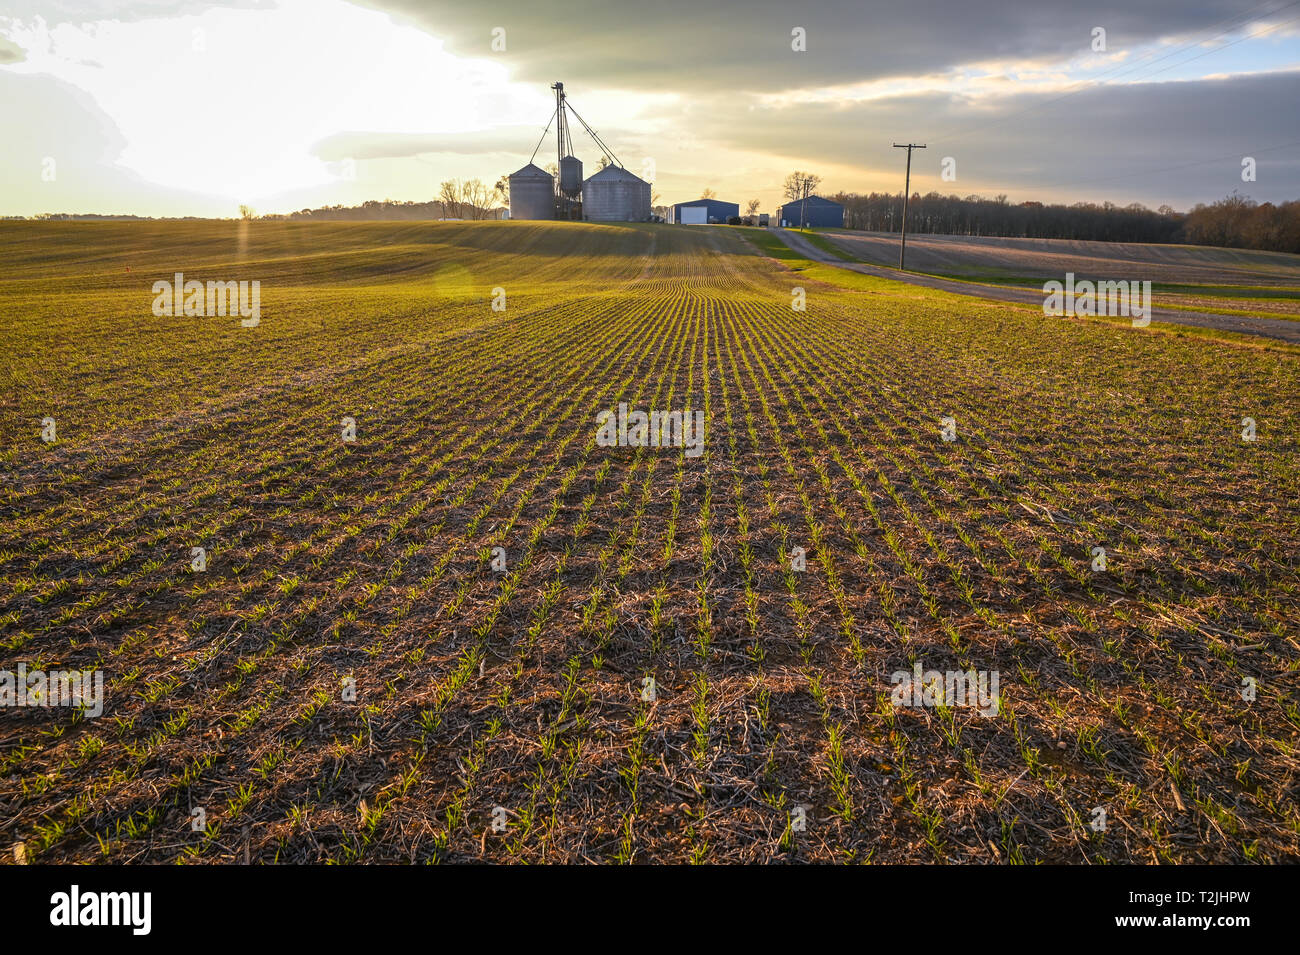 Rows of small grain crops beginning to grow in field with grain silos in background, Laytonsville Maryland Stock Photo